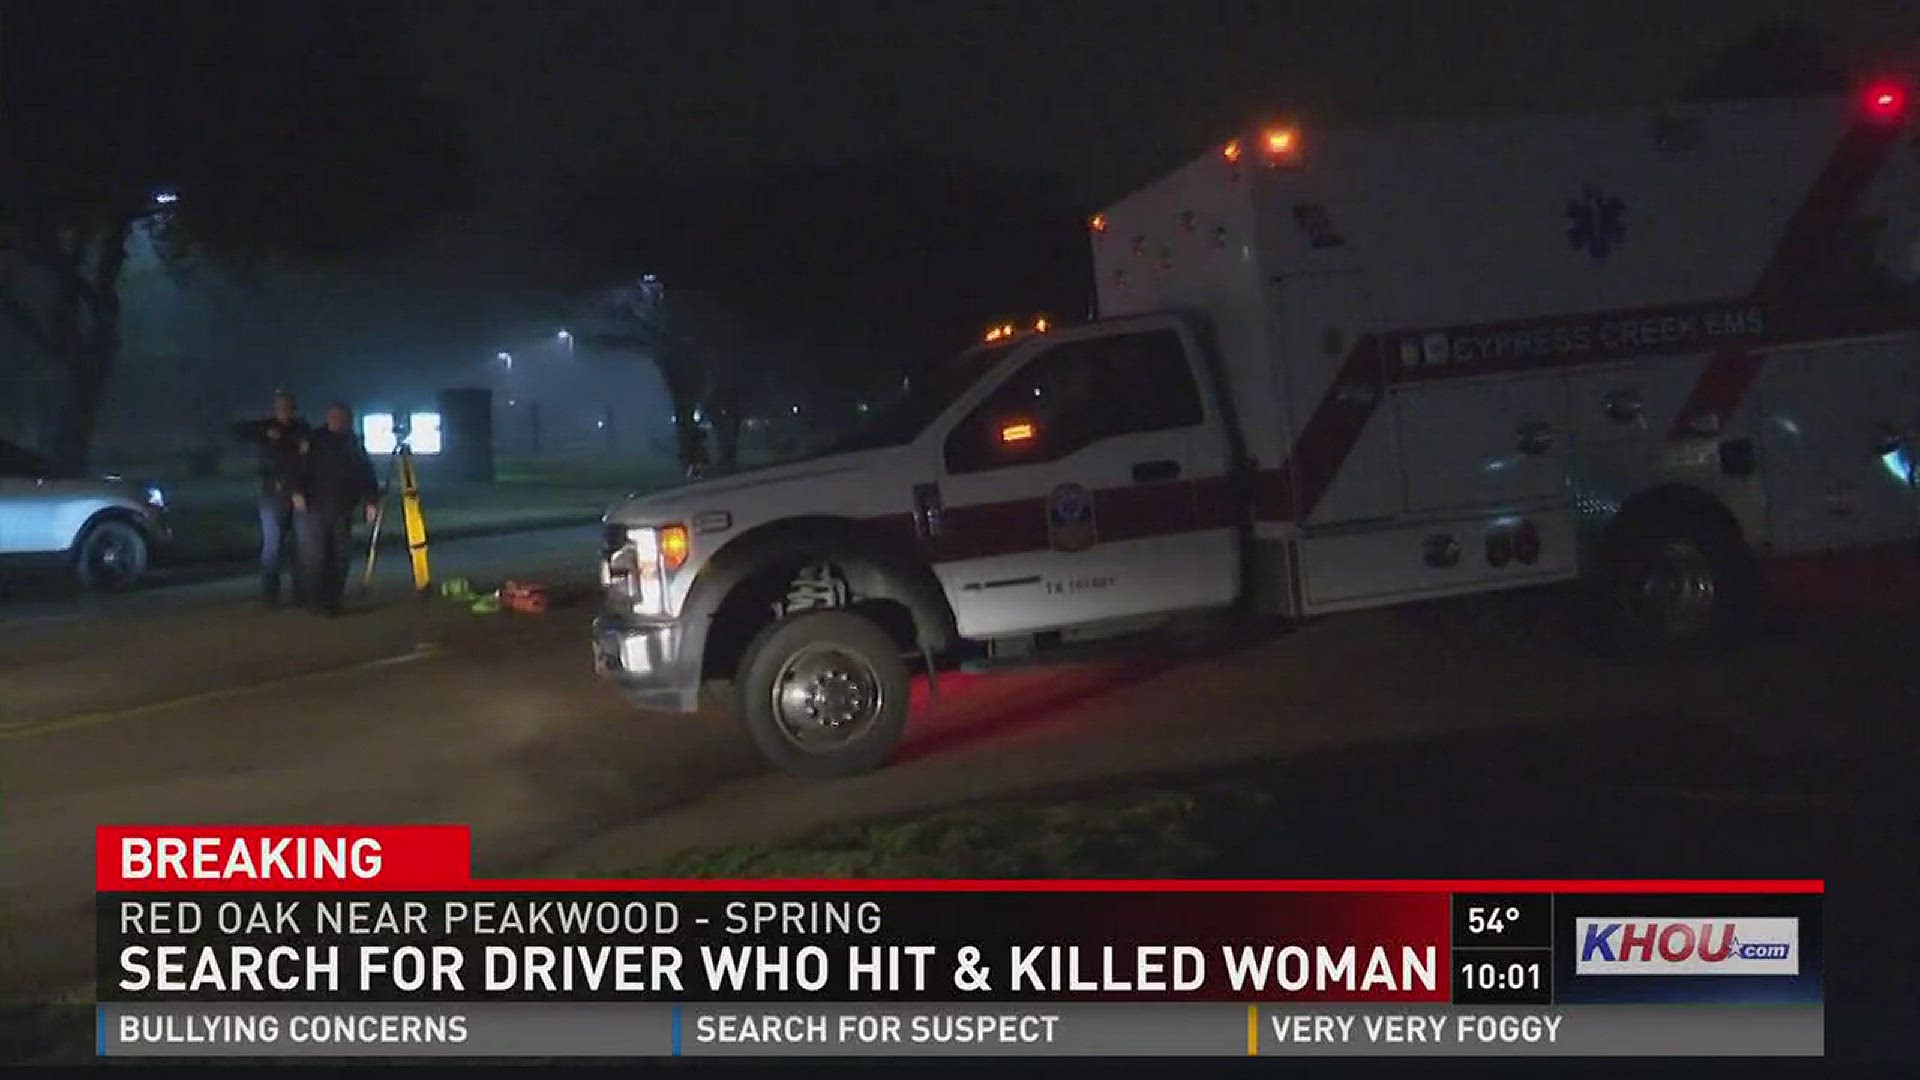 A woman was killed in a hit-and-run in Spring on Tuesday evening, authorities say.